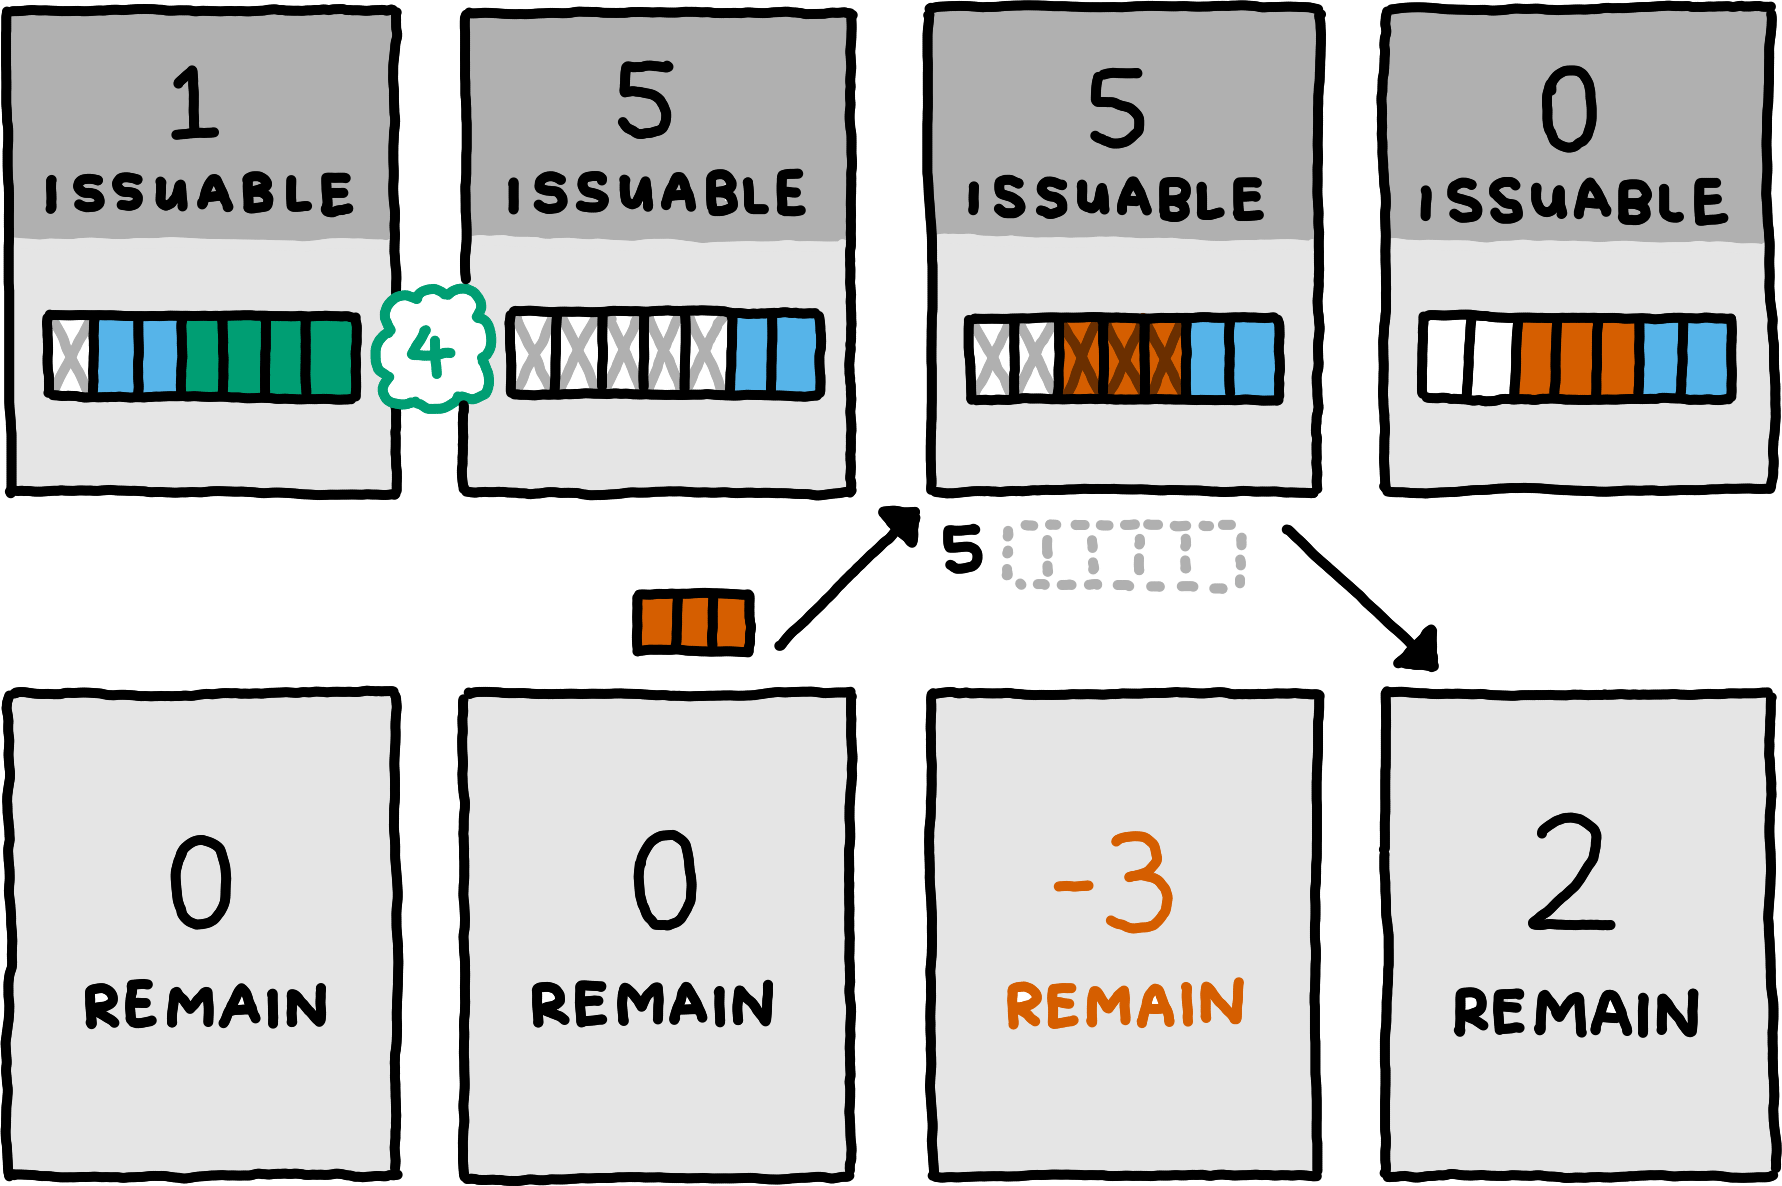 A server-client diagram. The server starts with a buffer containing one empty slot, a message of size two, and a message of size four. Its issuable guarantees are one, the client starts with zero remaining guarantees. In the first step, the server processes the four-byte message, leaving it with five empty buffer slots and as many issuable guarantees; the client state remains unchanged. Next, the client optimistically sends a three-byte message, leaving its remaining guarantees at negative three. The server receives and buffers the message, its issuable guarantees remain unchanged at five, despite now having only two free buffer slots. Finally, the server issues five guarantees, leaving it with zero issuable guarantees. The client’s remaining guarantees increase by five to positive two.